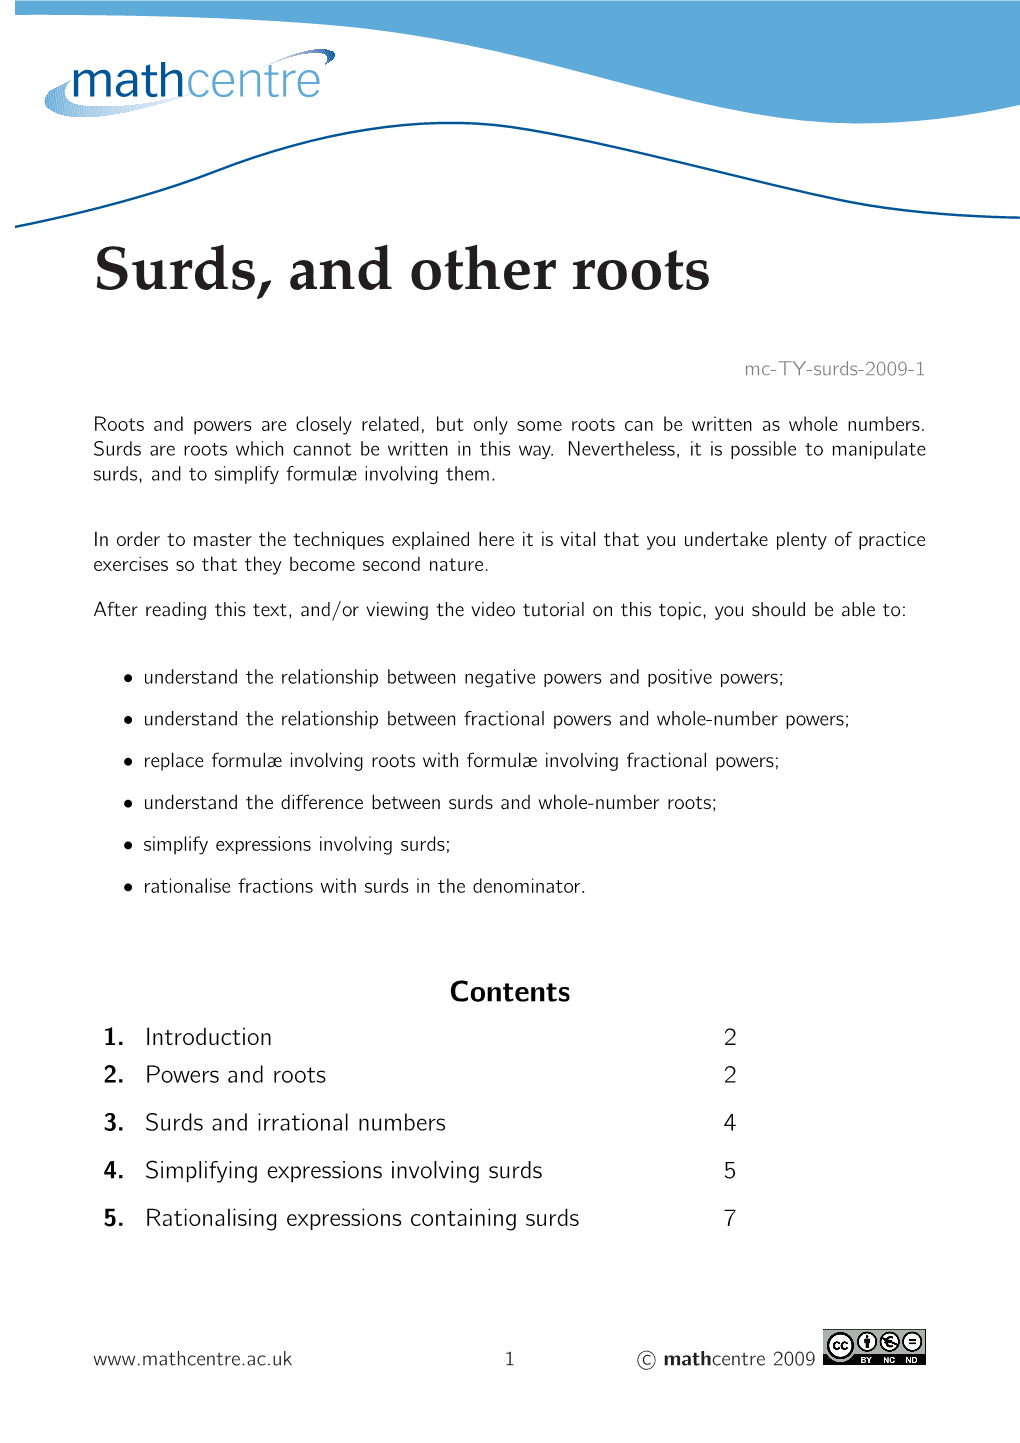 Surds, and Other Roots